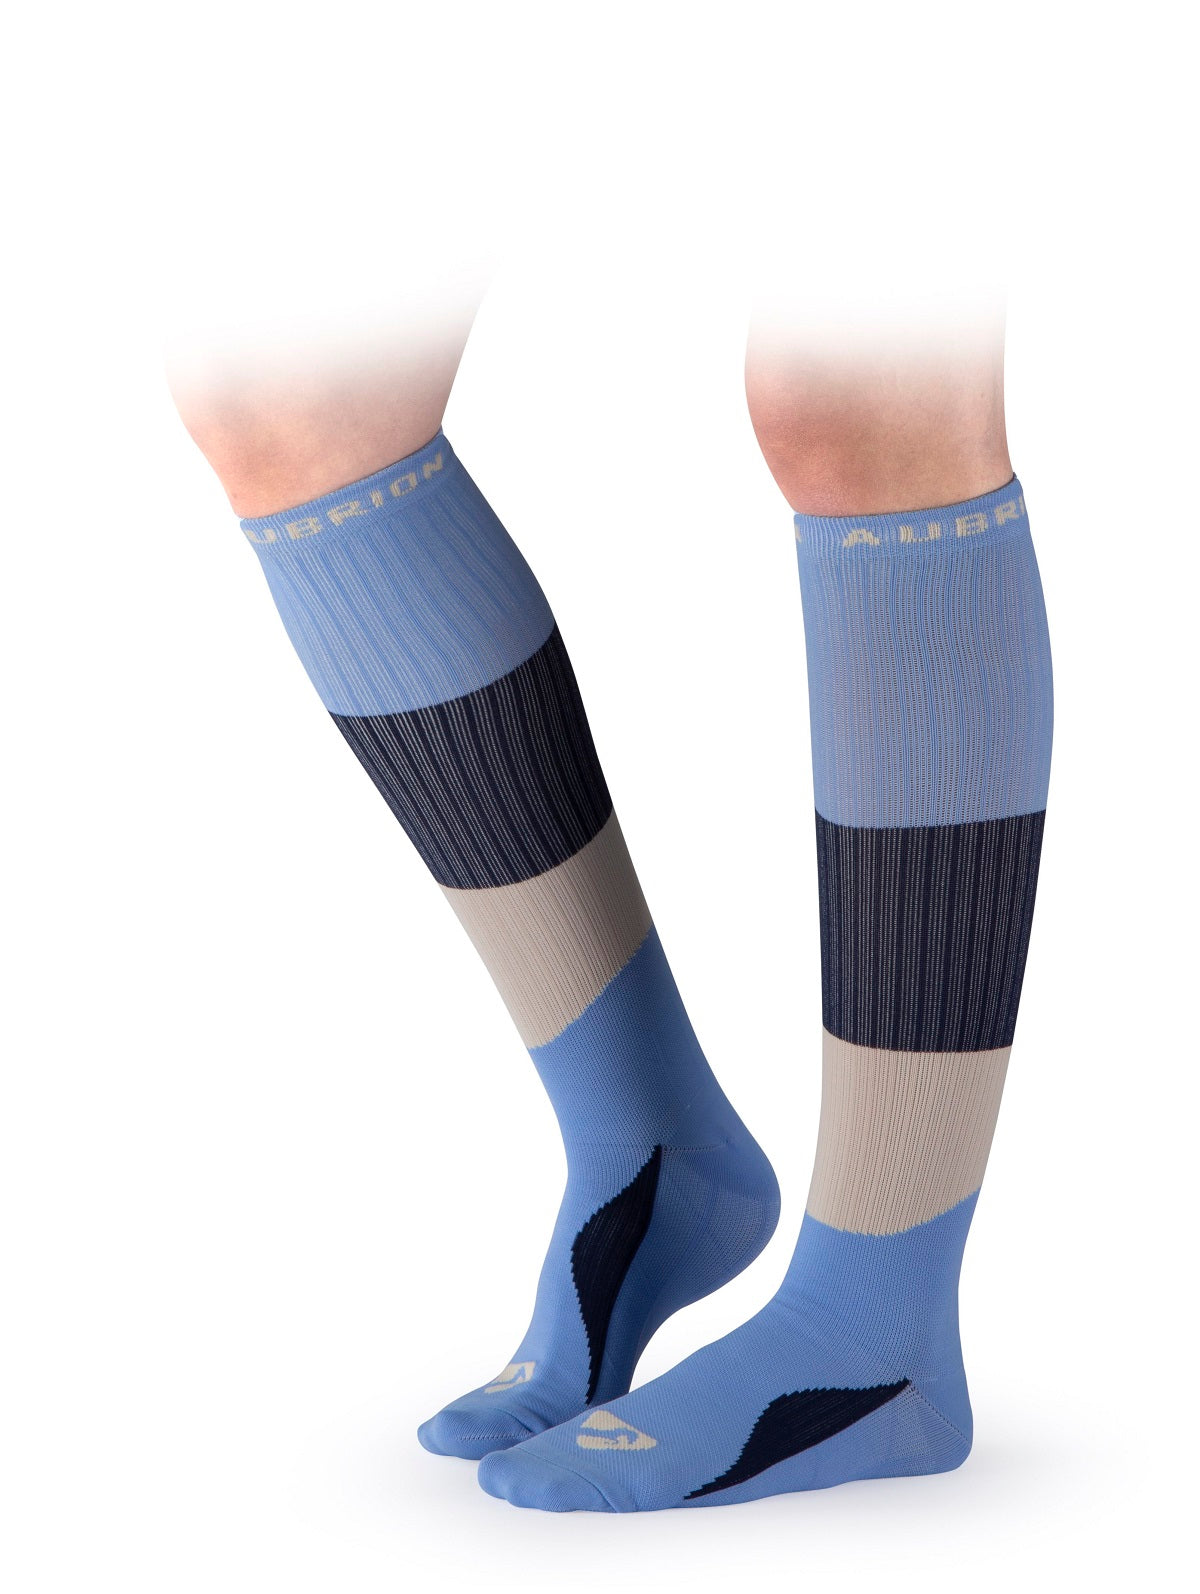 Shires Aubrion Perivale Compression Socks Adult Lad One Size #8170